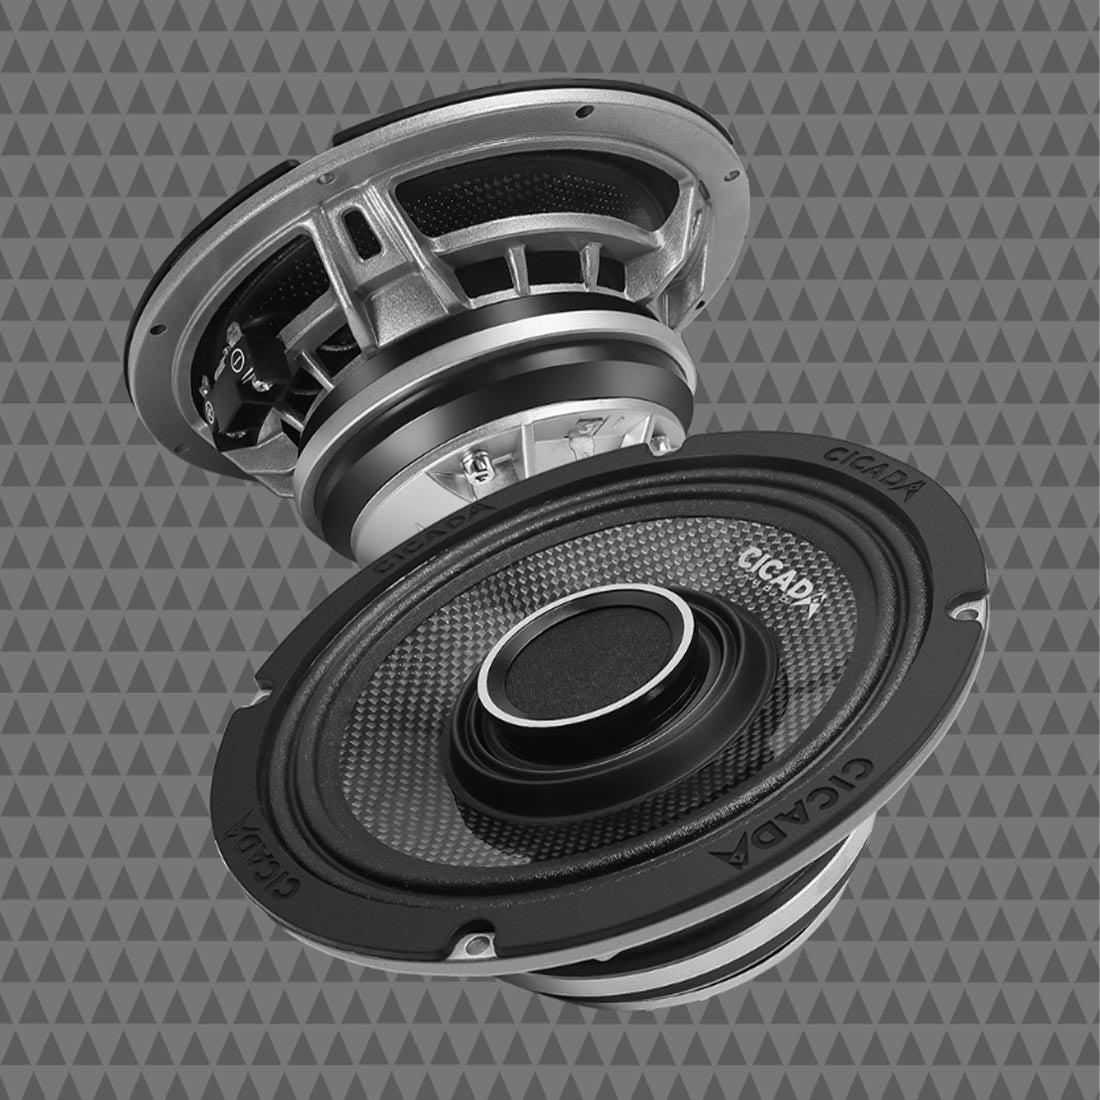  Cicada Audio CHX652 6.5" Pro Coaxial Horn Motorcycle Speakers